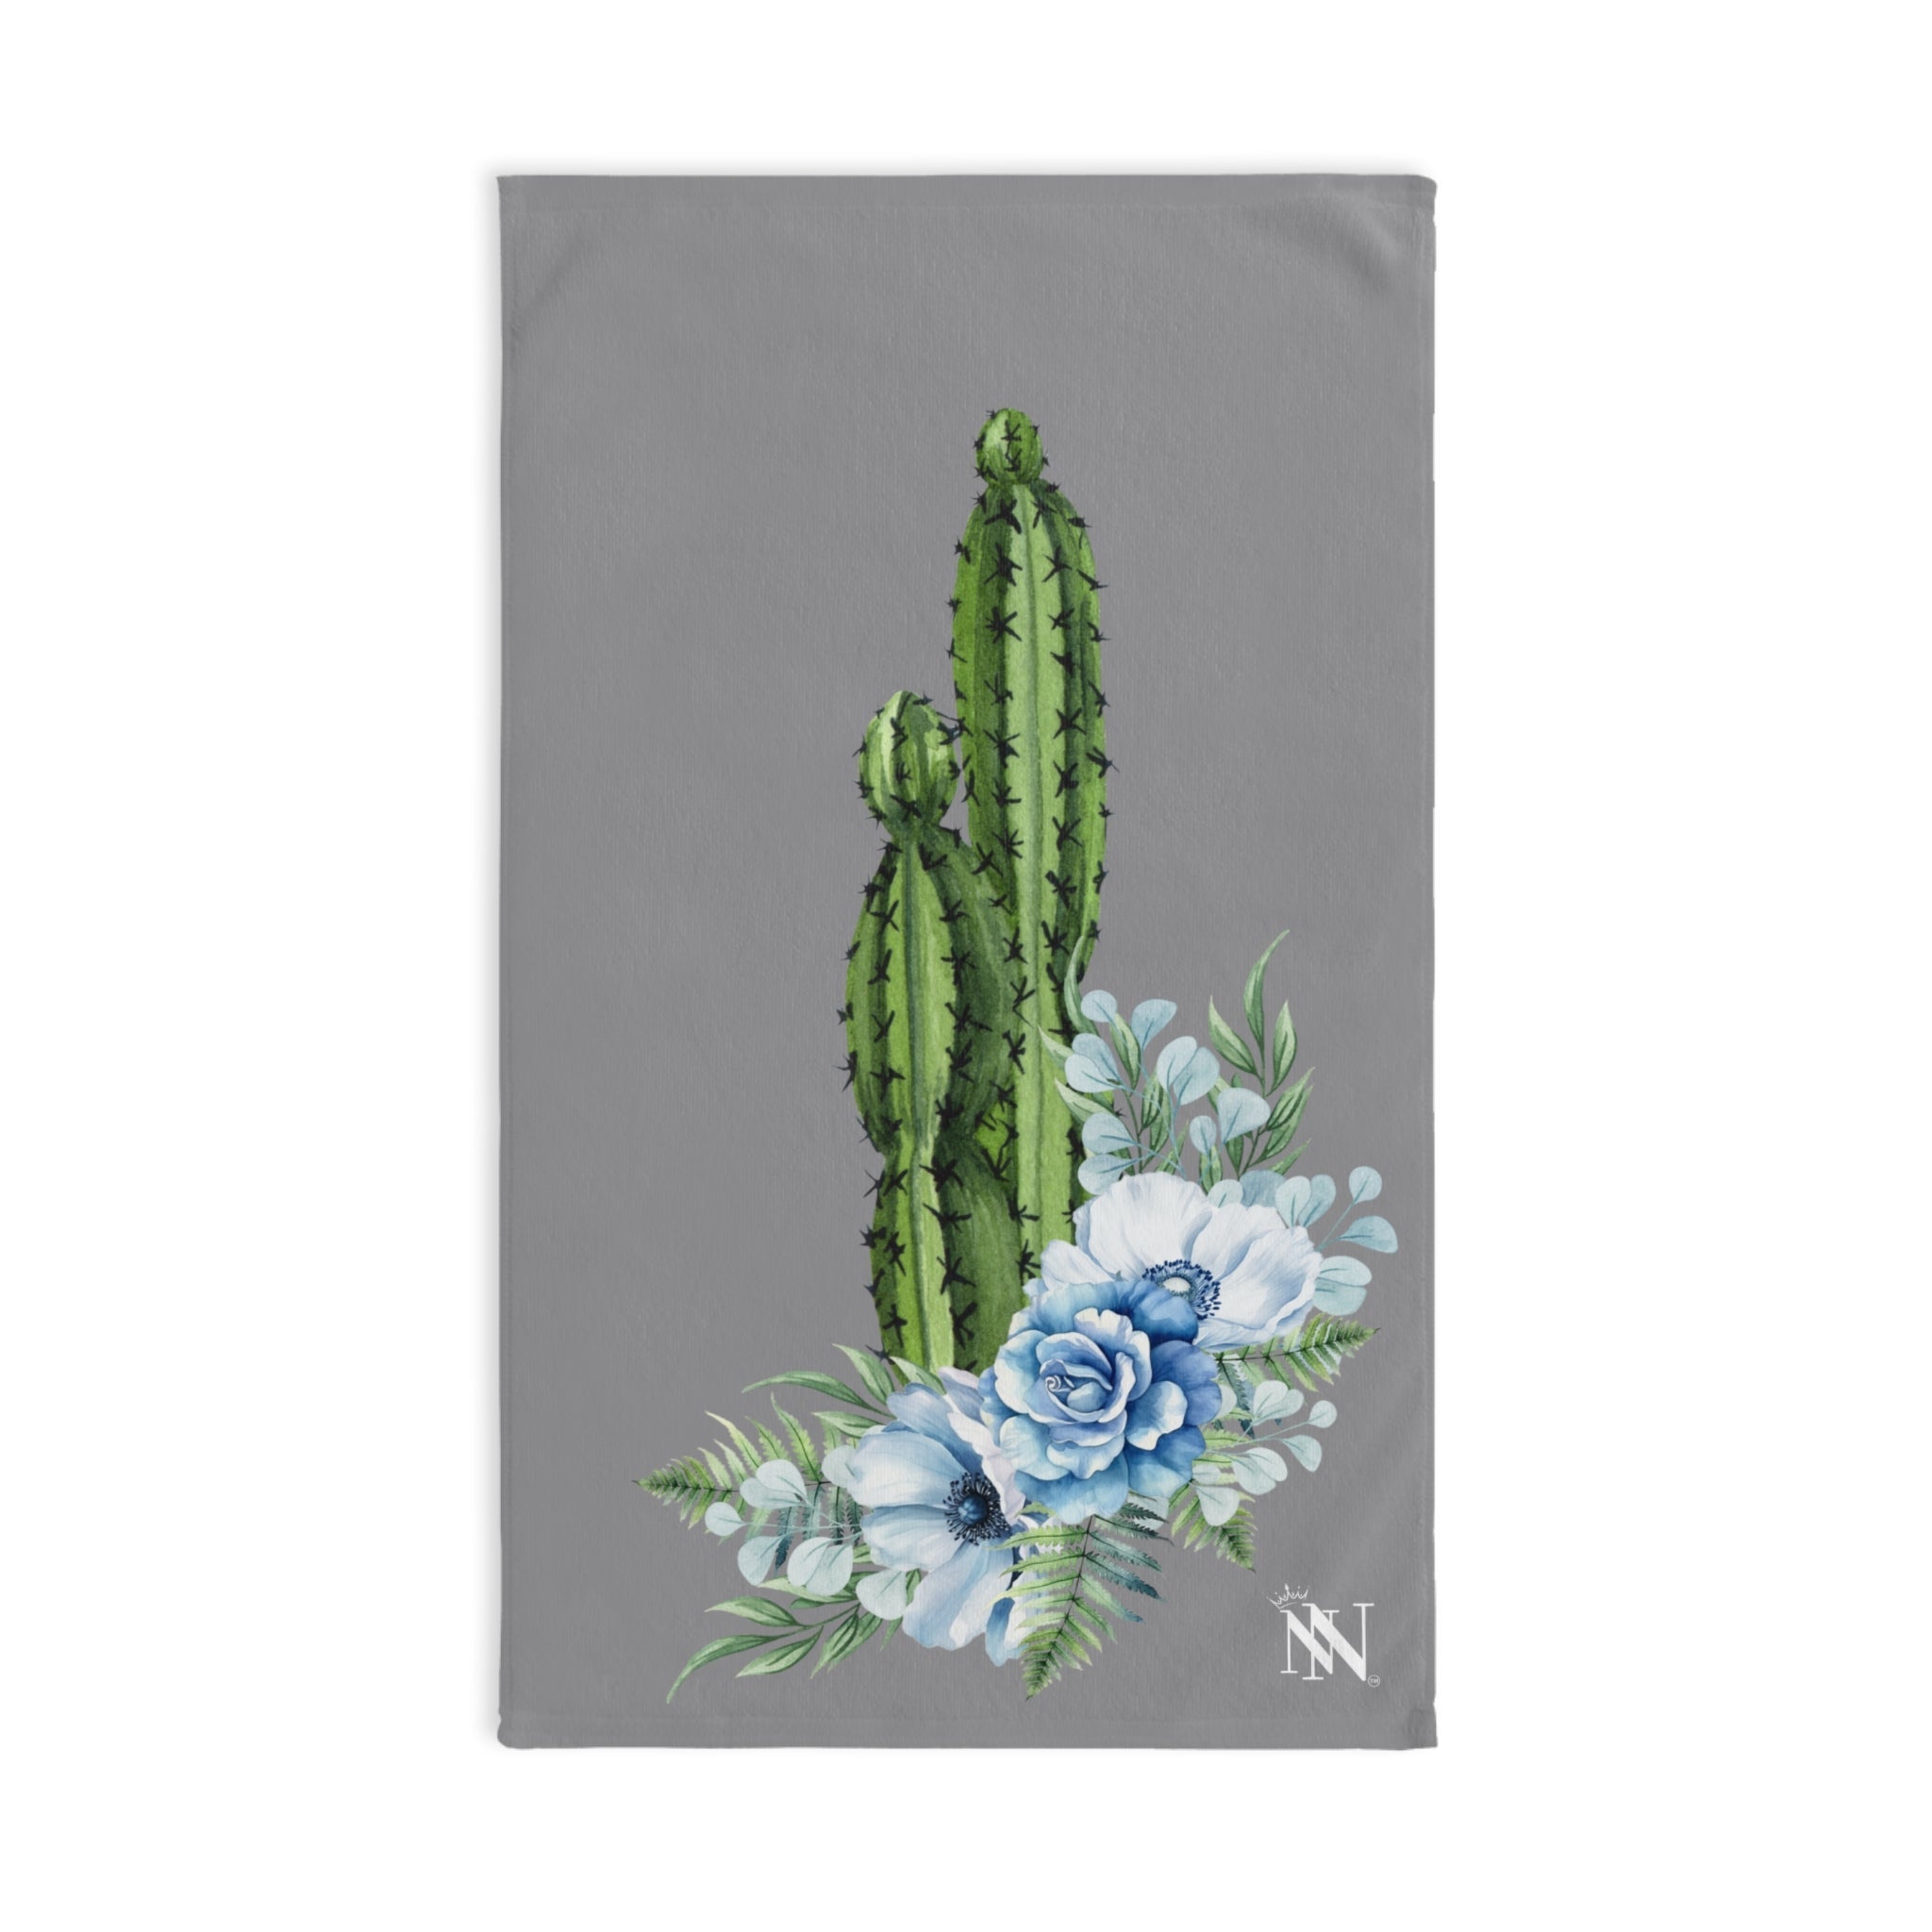 Cactus Rose Vows Grey | Anniversary Wedding, Christmas, Valentines Day, Birthday Gifts for Him, Her, Romantic Gifts for Wife, Girlfriend, Couples Gifts for Boyfriend, Husband NECTAR NAPKINS